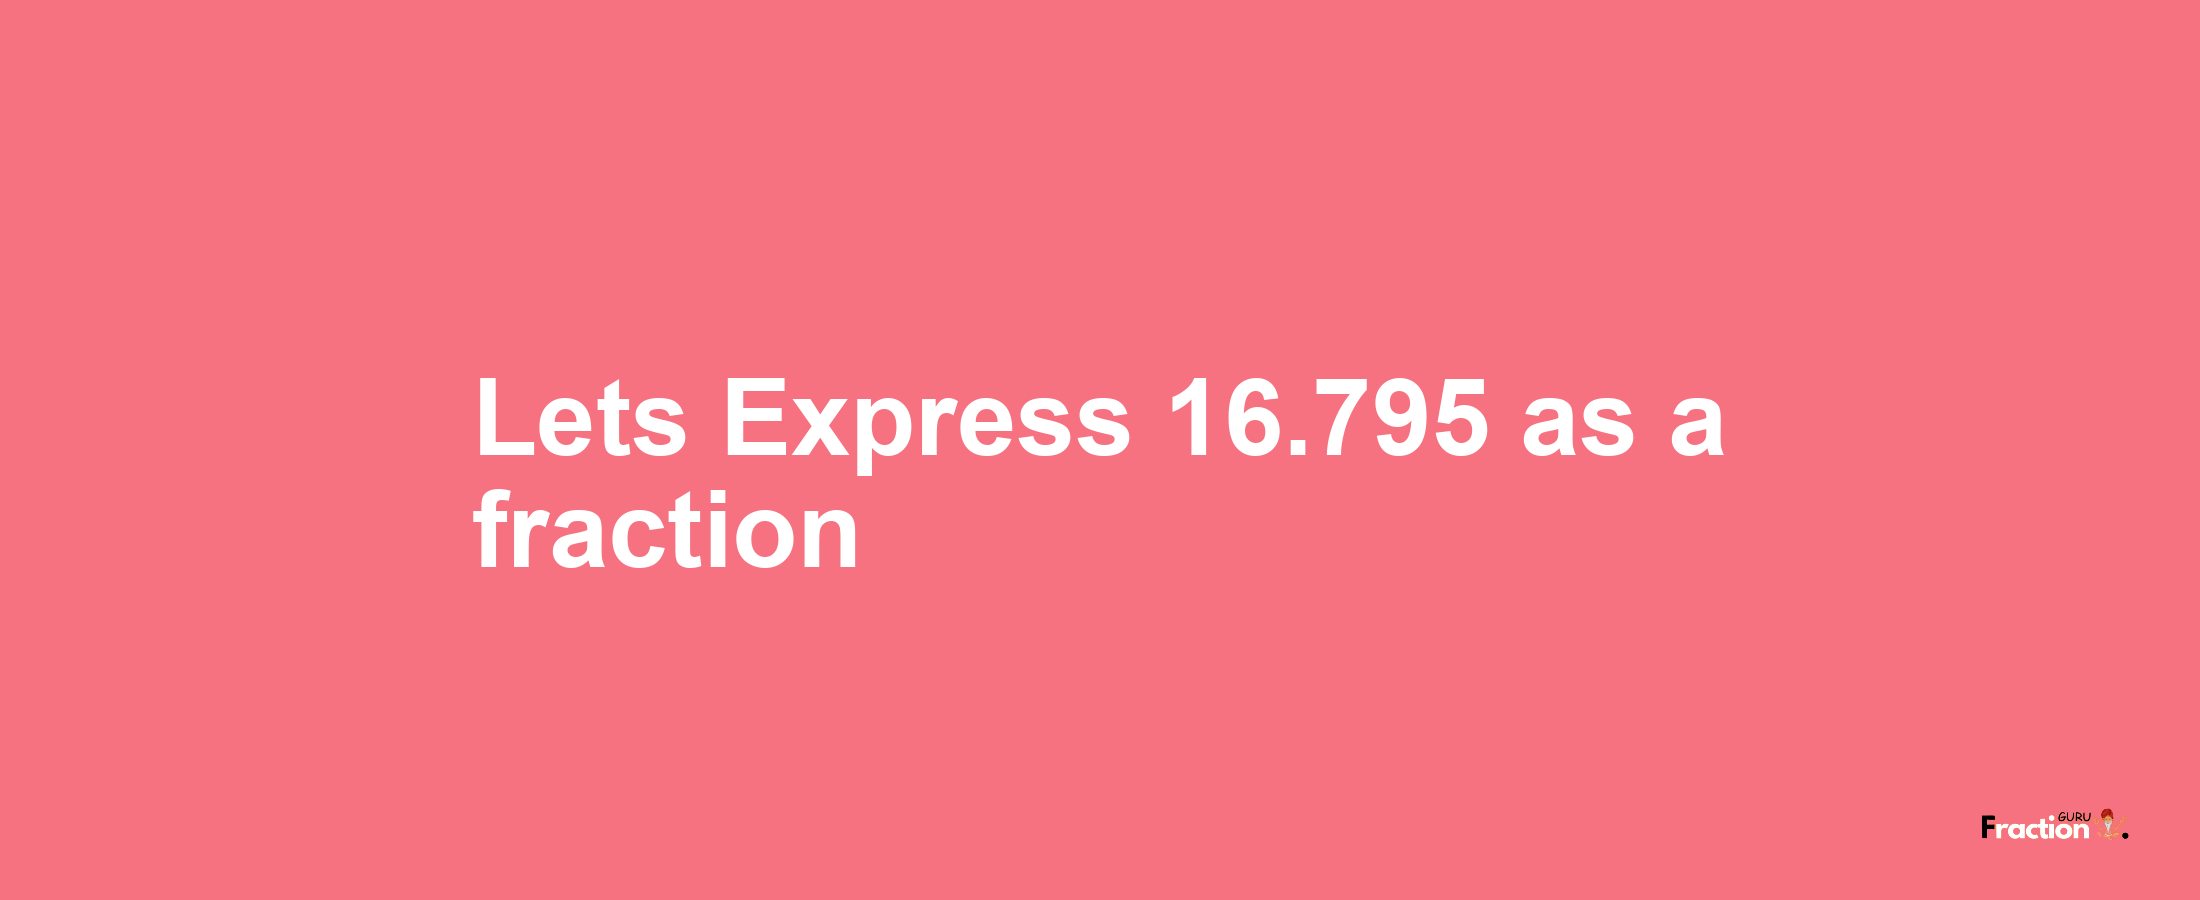 Lets Express 16.795 as afraction